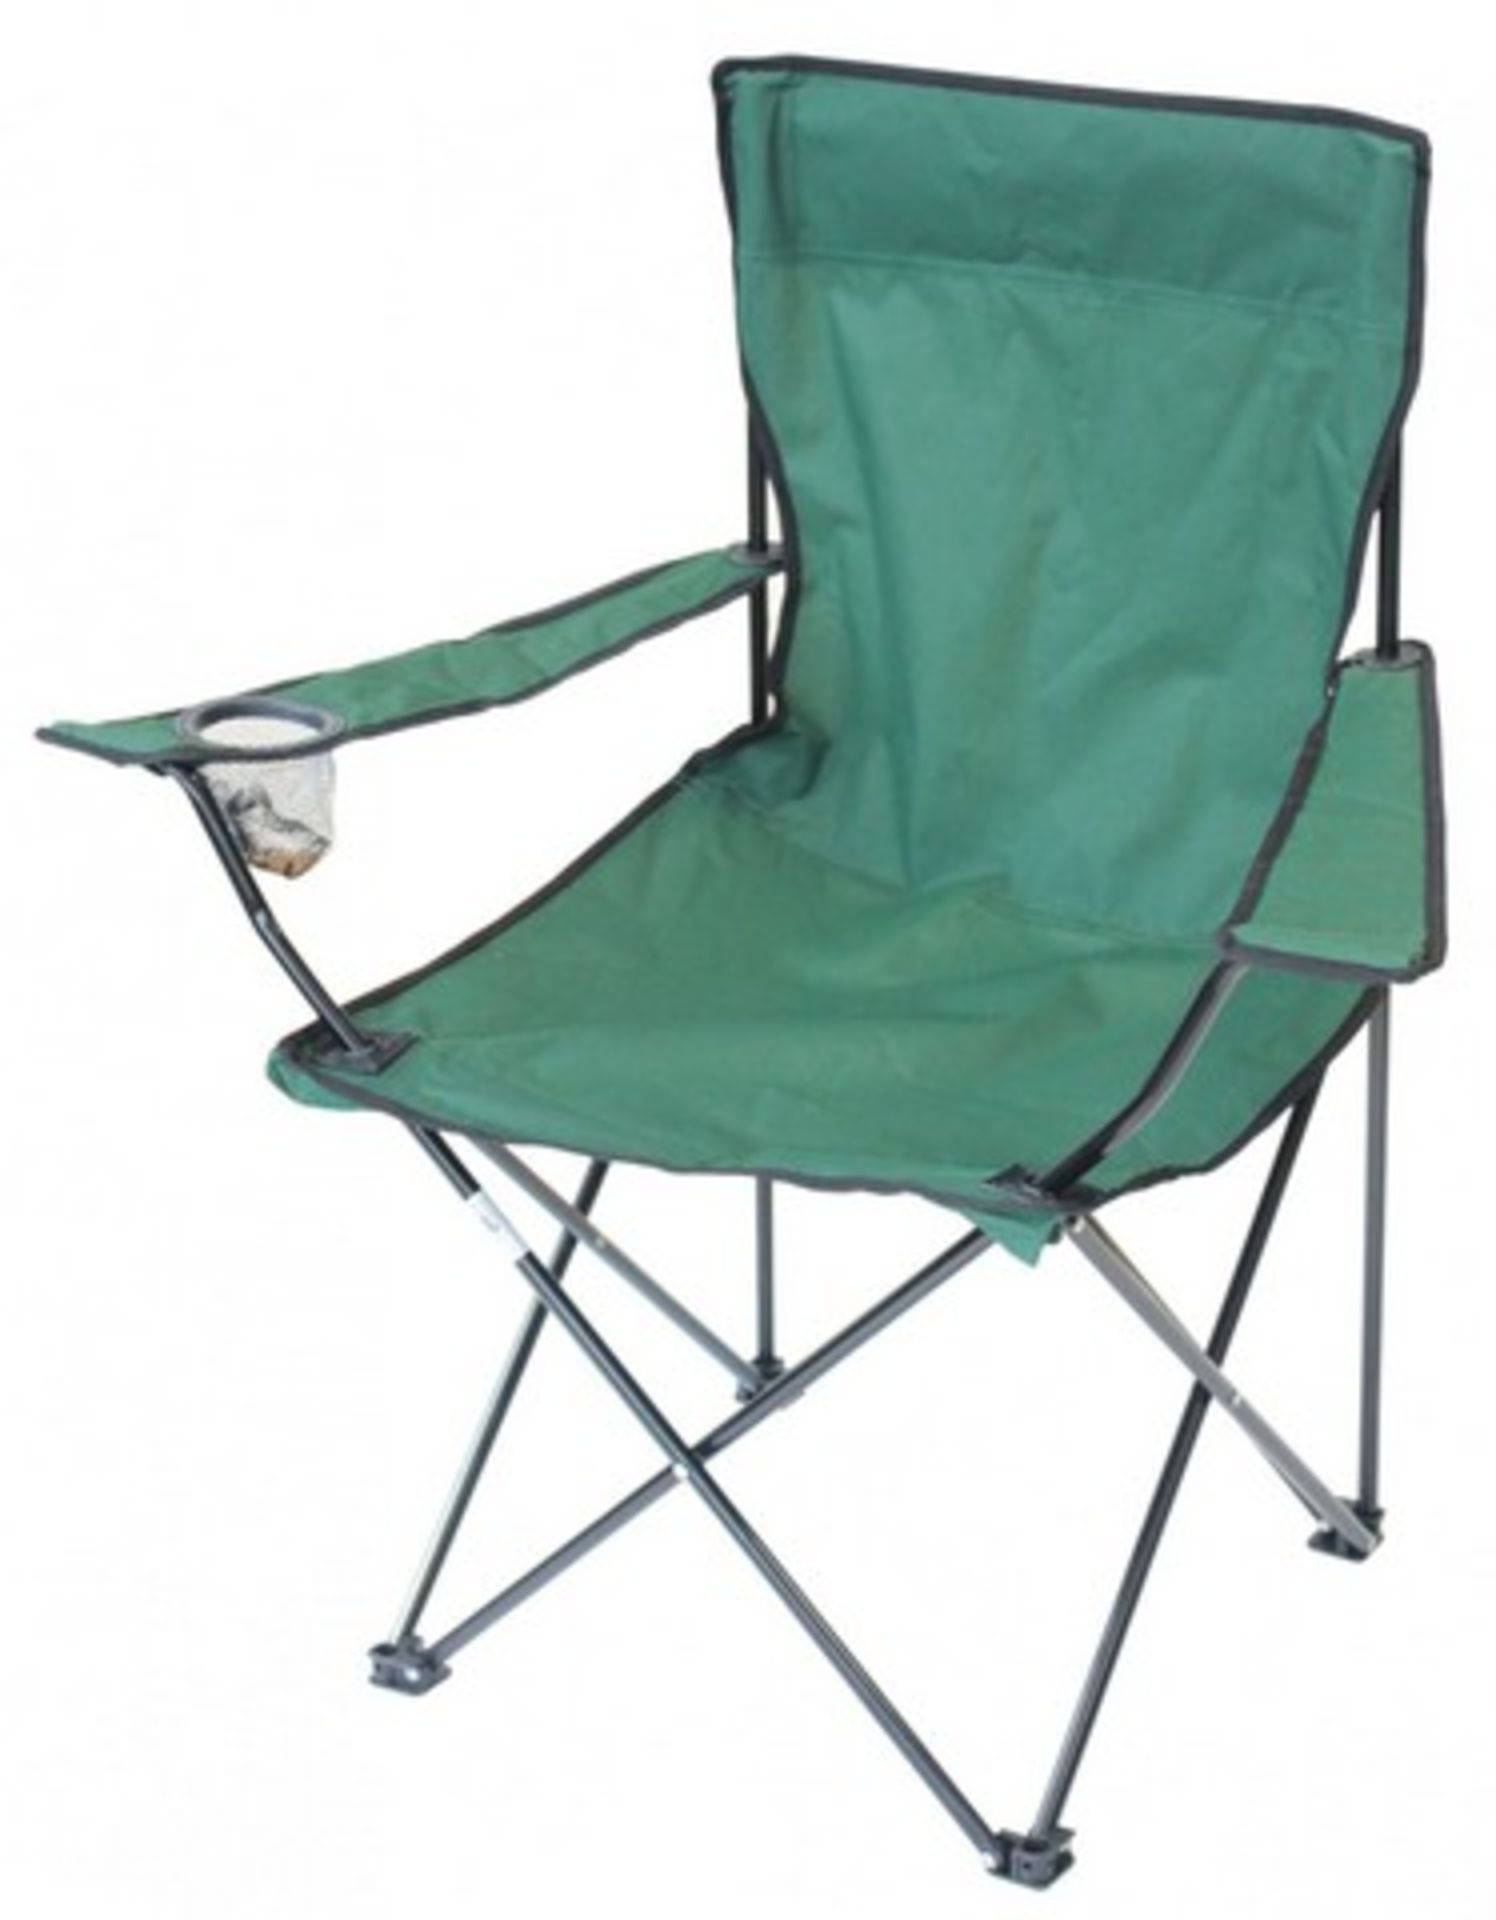 V Brand New Folding Outdoor Chair with Cup Holder RRP £15 (similar Millets)